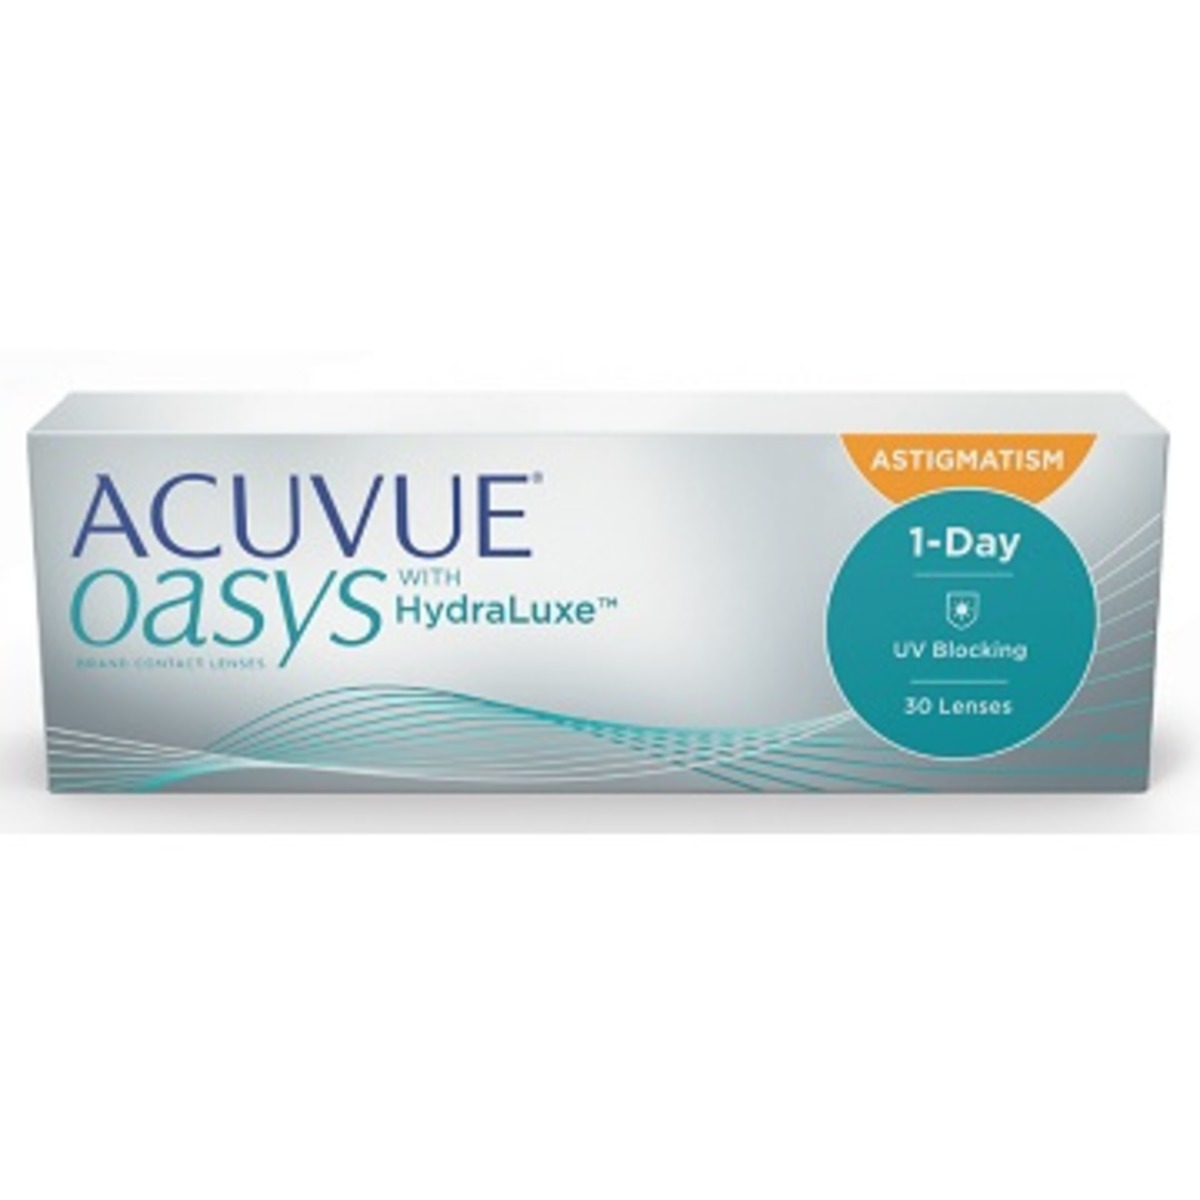 1 Day Acuvue Oasys With HydraLuxe Astigmatism 30L